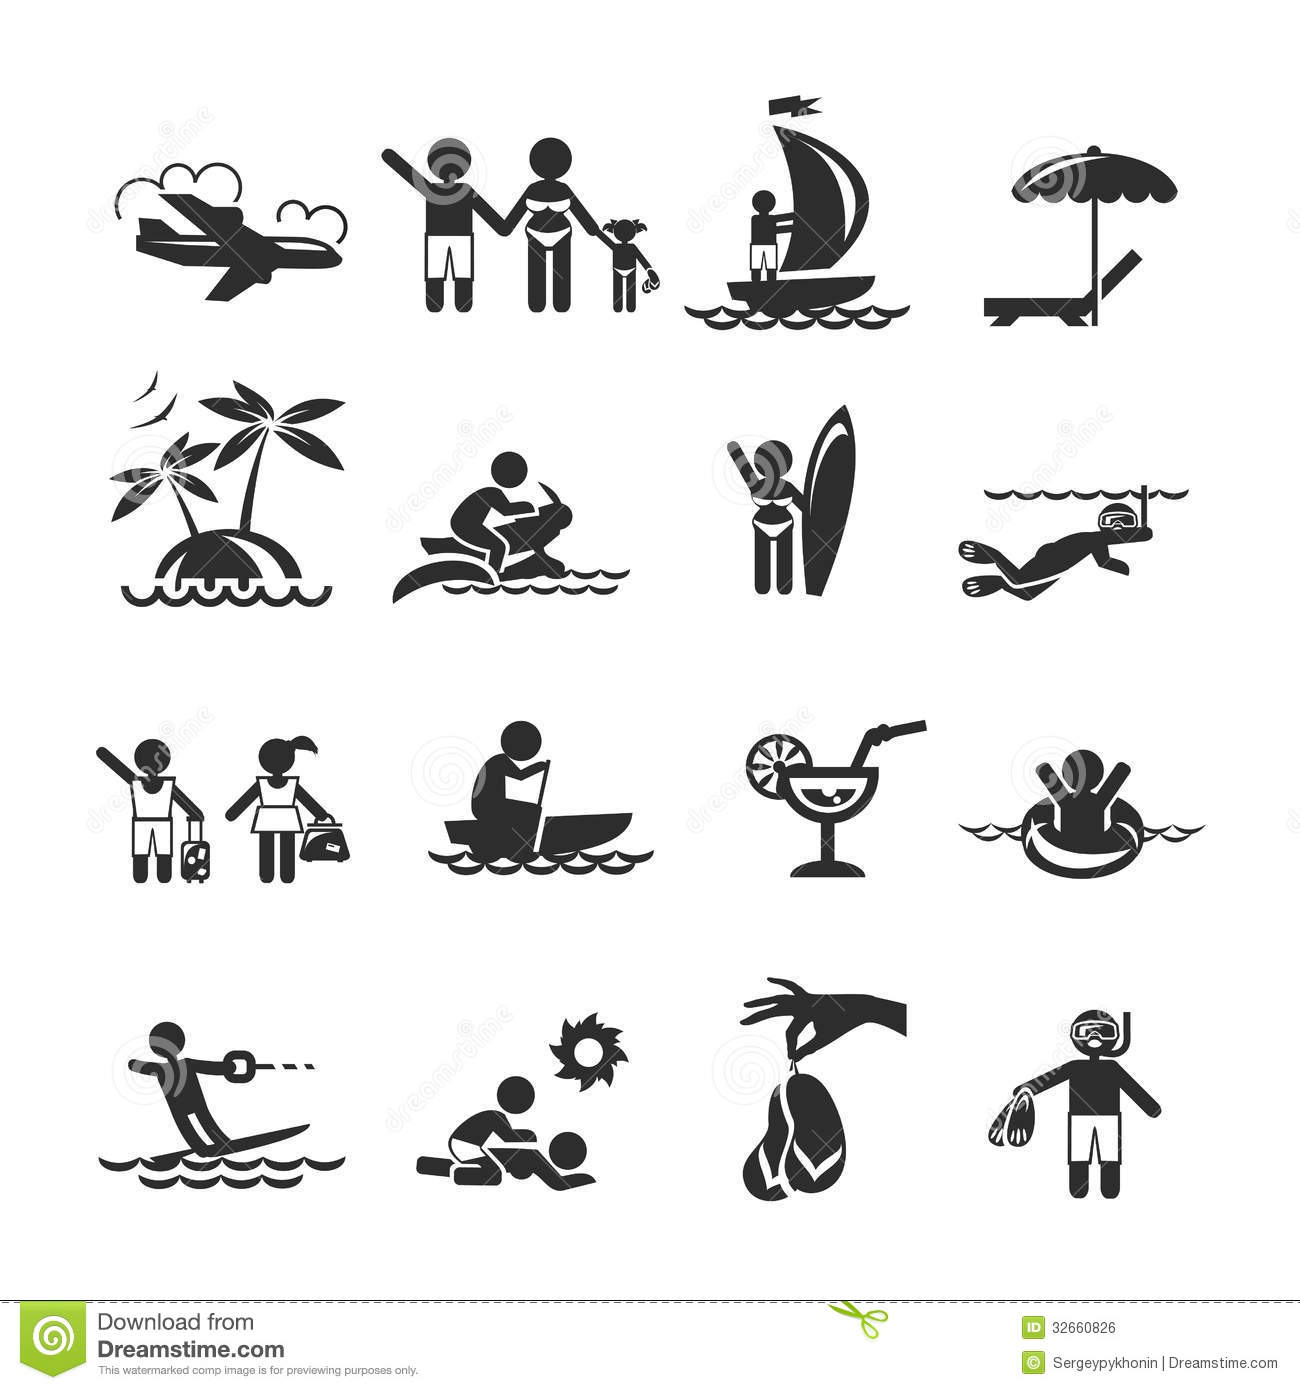 Summer holiday vector icon - Holidays Icons free download